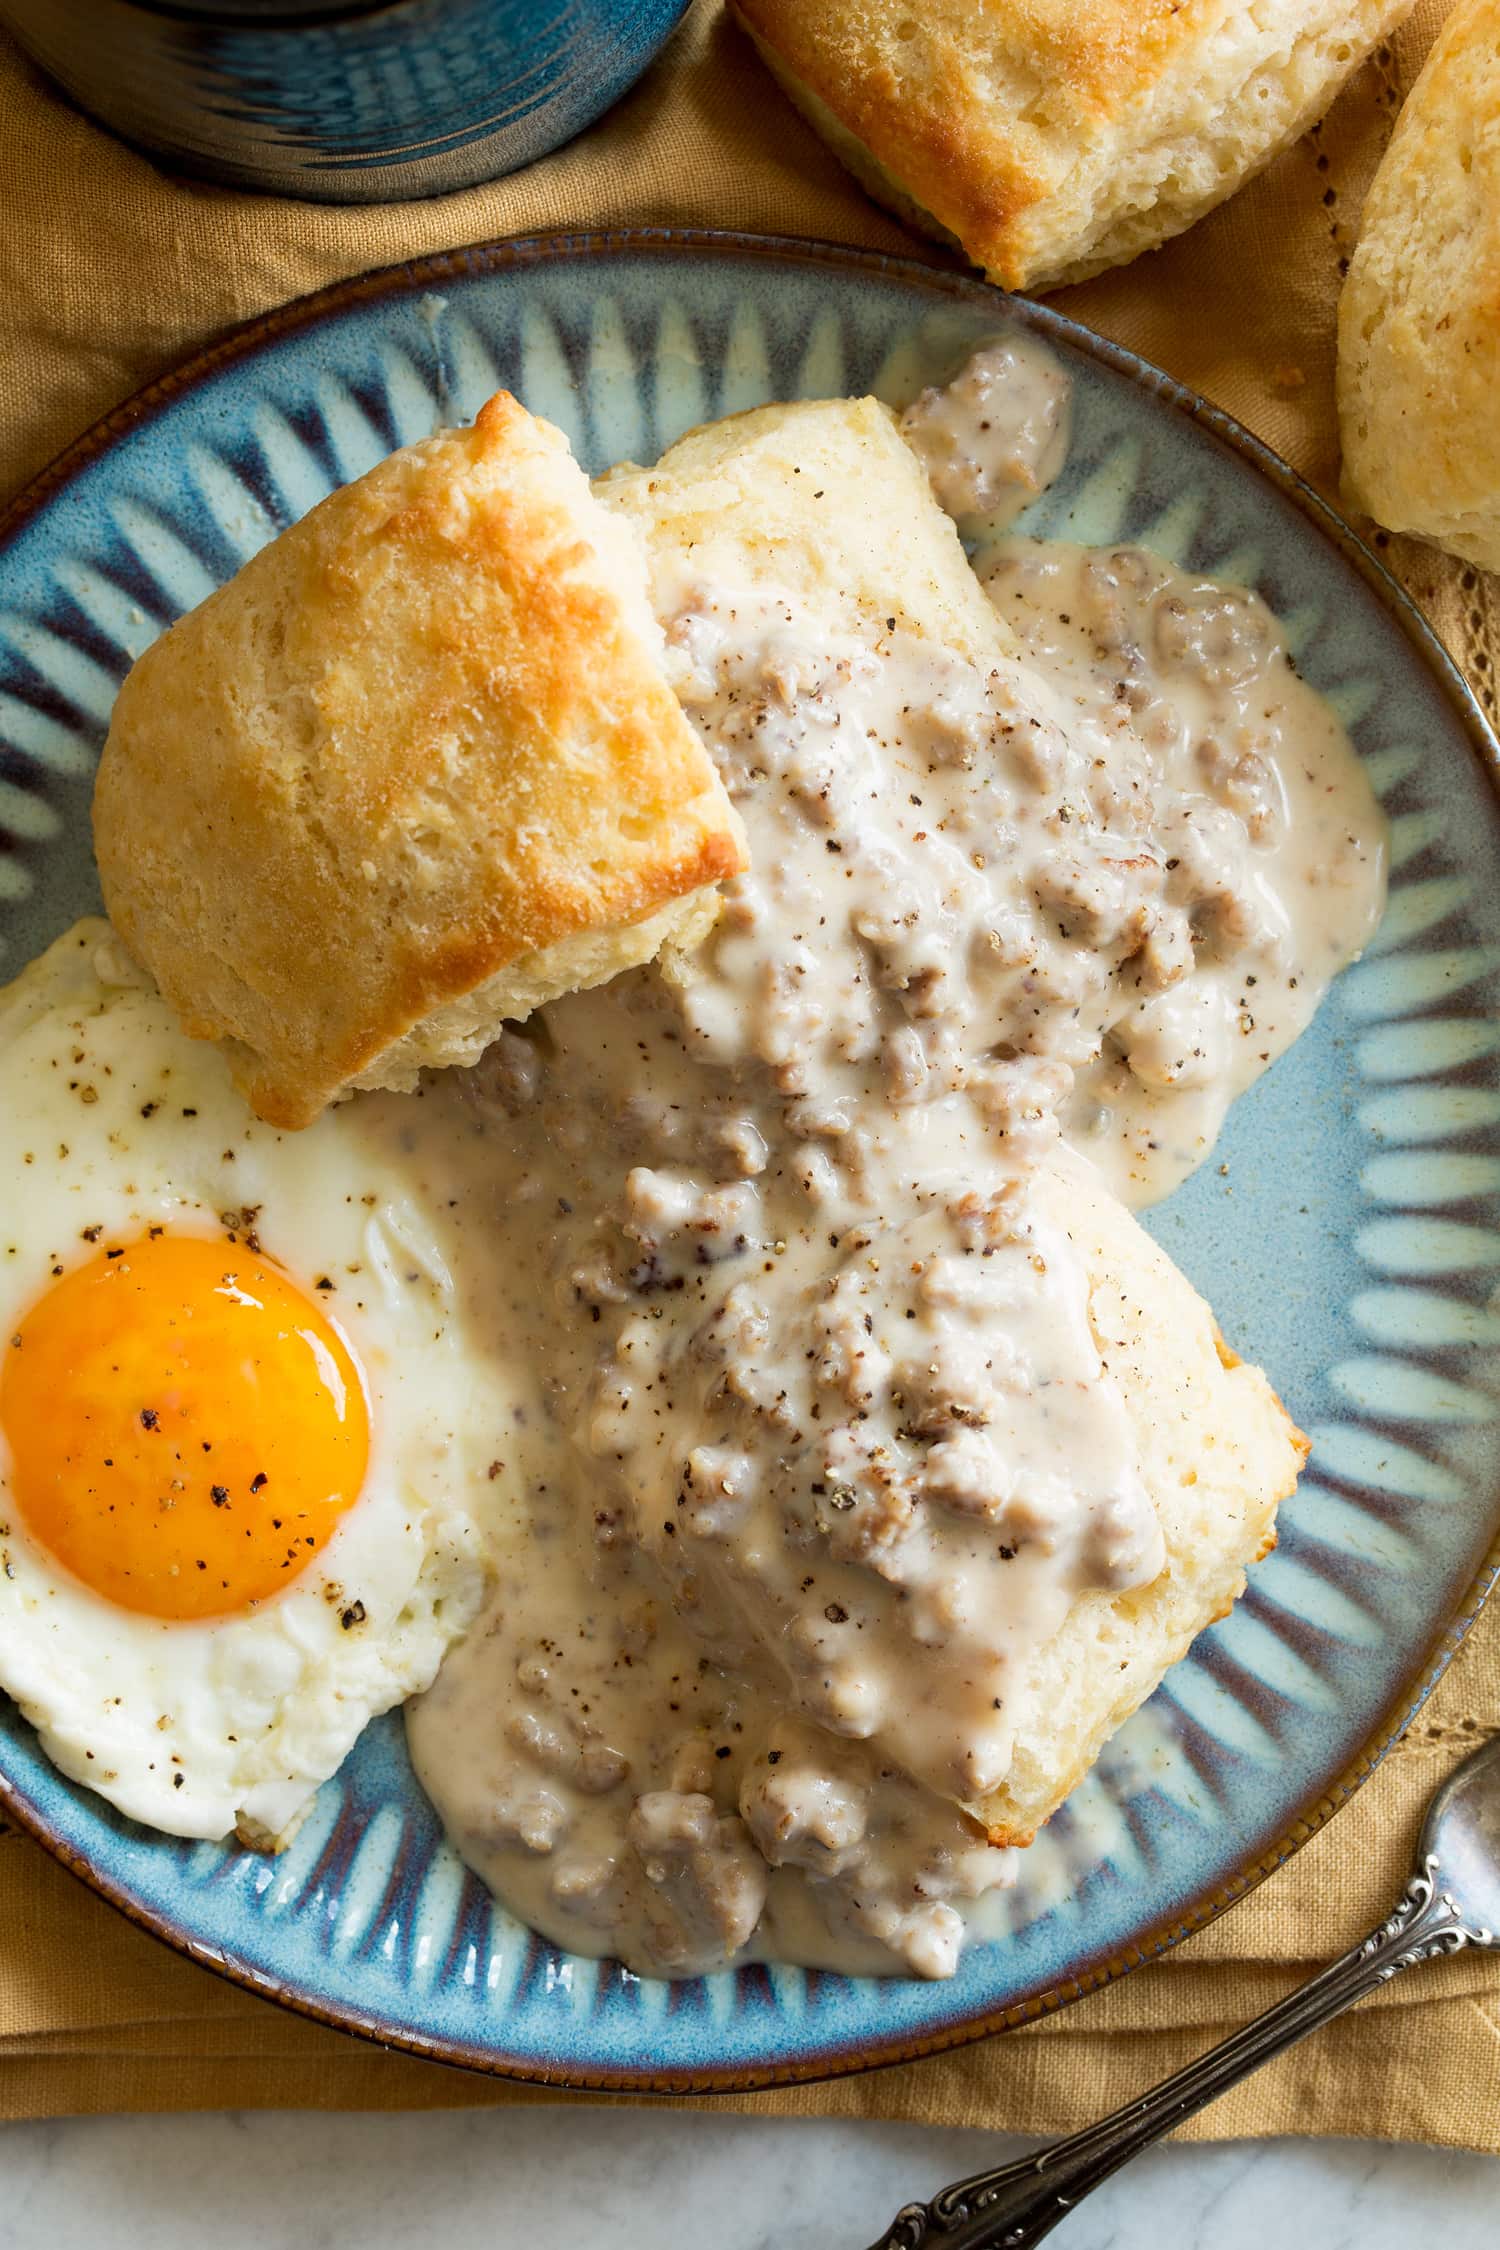 Biscuits and gravy served with a sunny side egg as a serving suggestion.